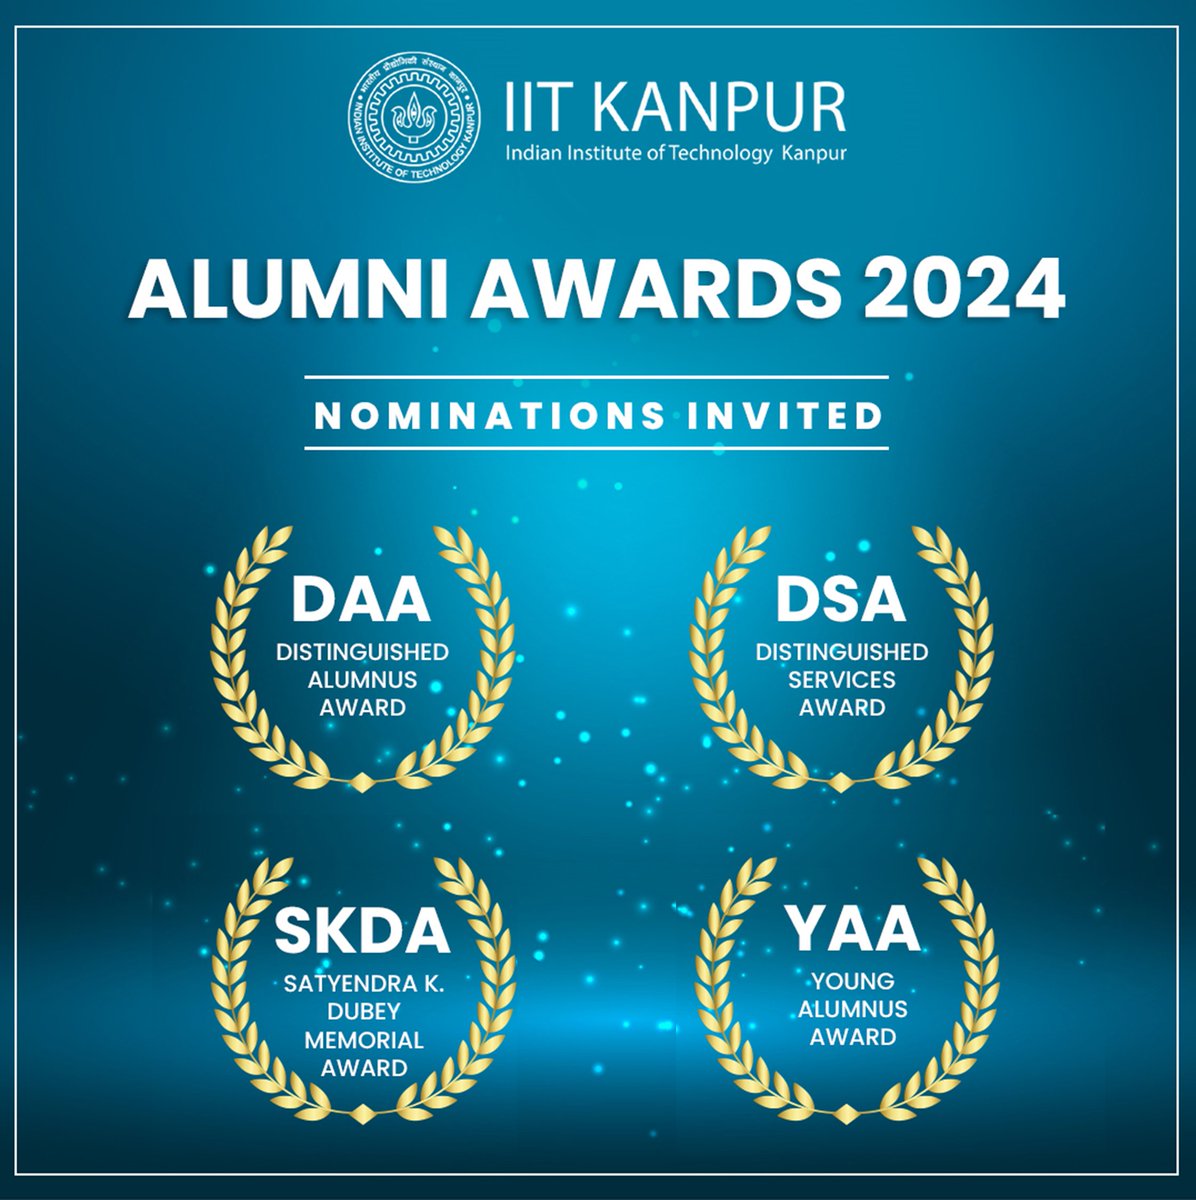 Continuing IIT Kanpur’s tradition of recognizing and honoring the exemplary achievements and outstanding contributions of its alumni, I am delighted to invite your nominations of those exceptional alumni who have achieved excellence in their careers and have made significant